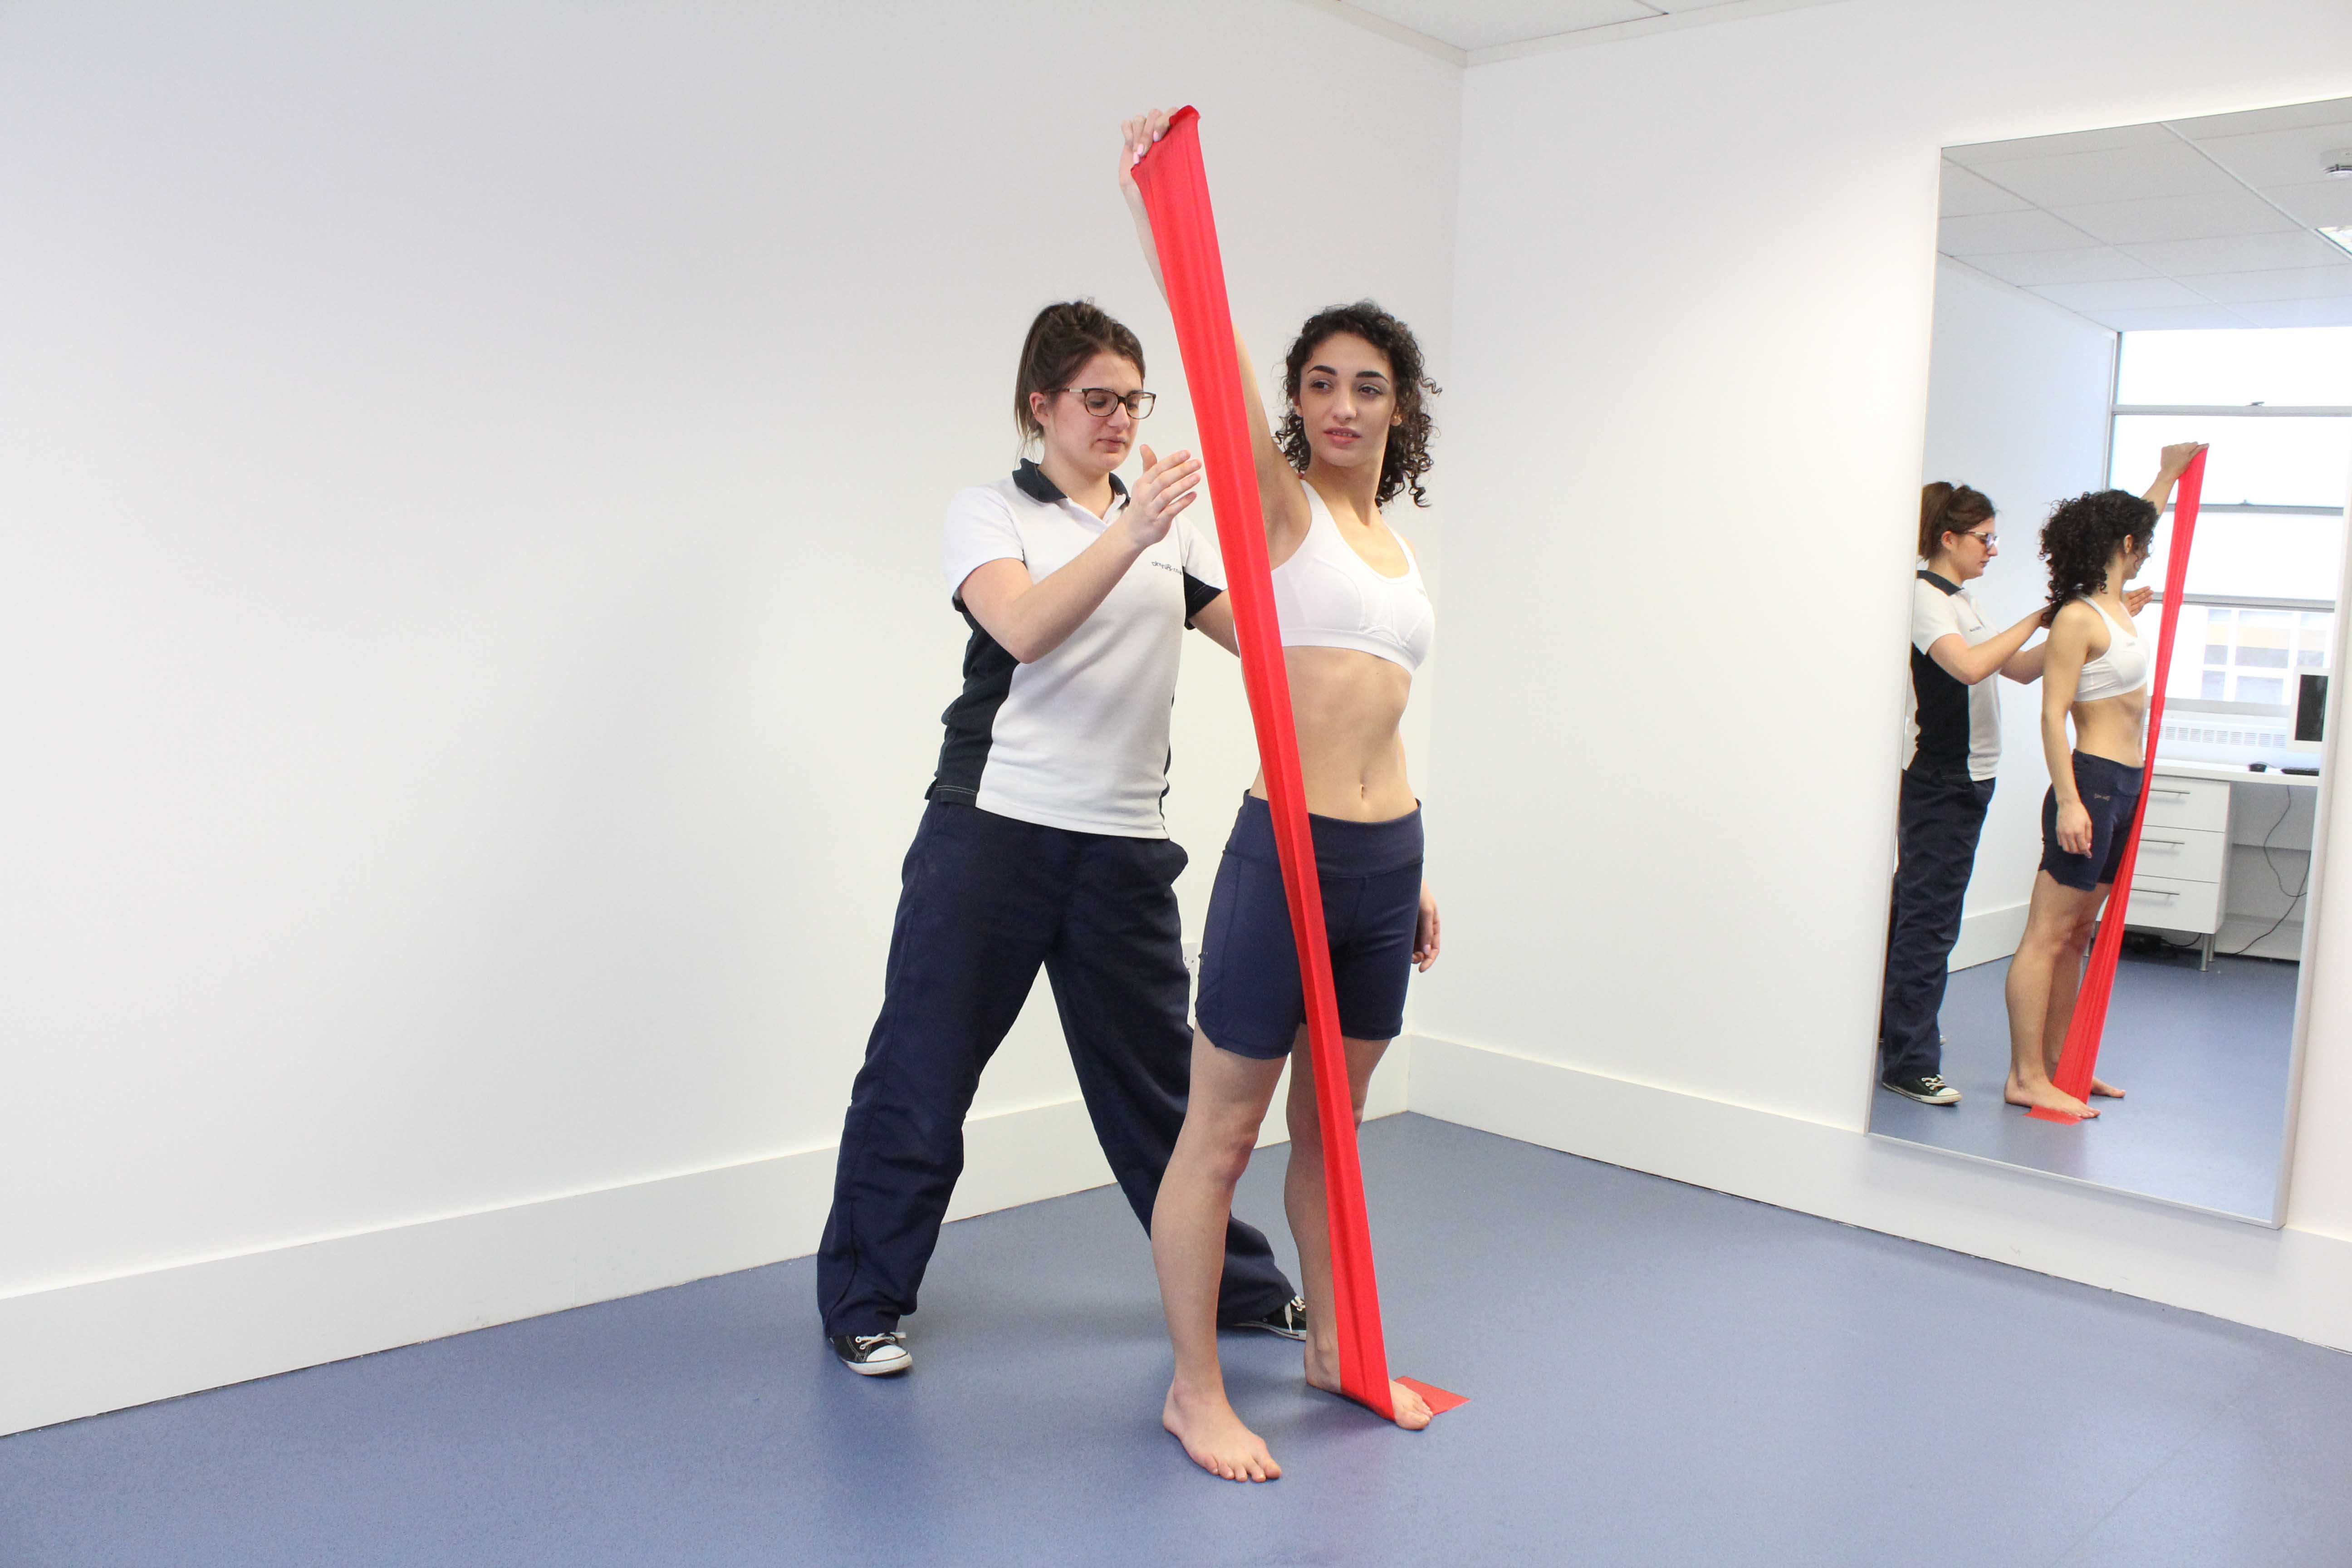 functional lower limb strengthening exercises supervised by an experienced physiotherapist